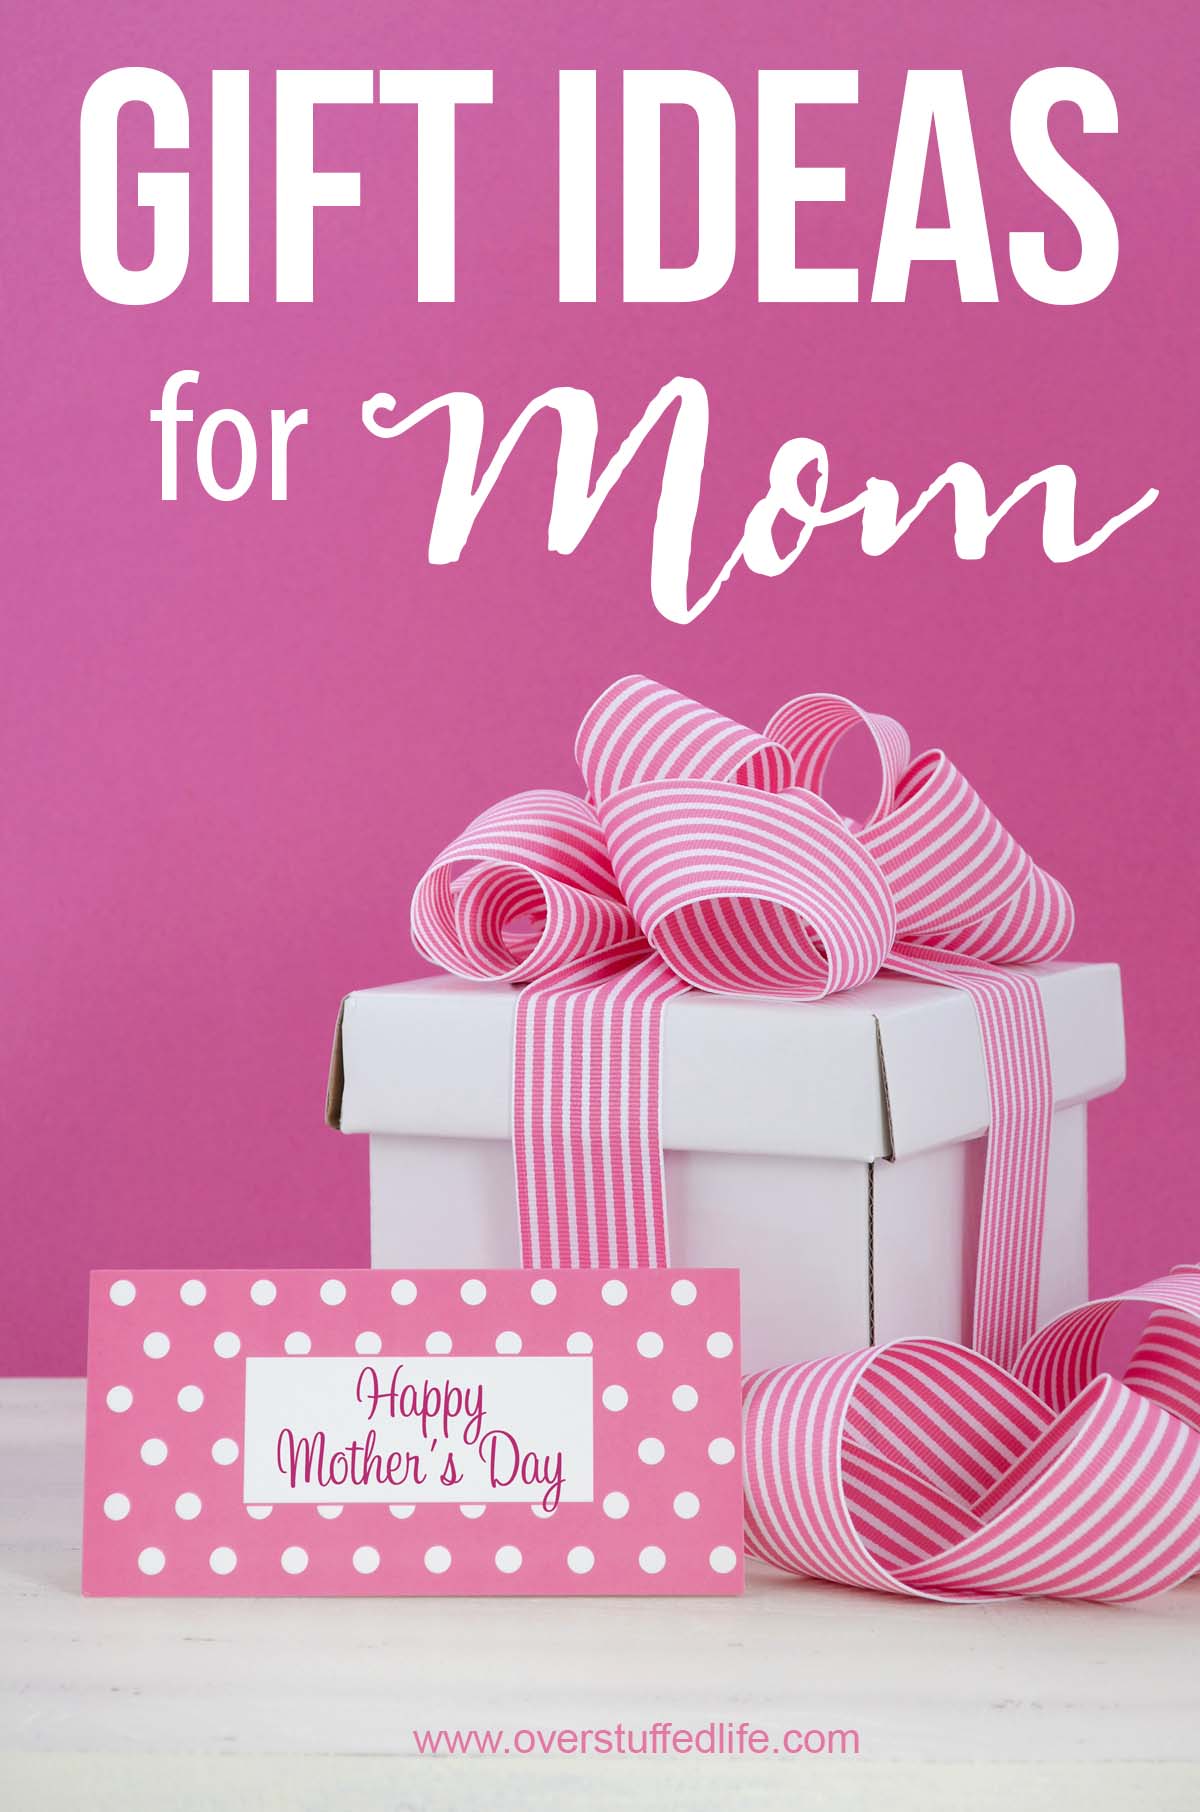 21 Gift Ideas for Mom - Overstuffed Life